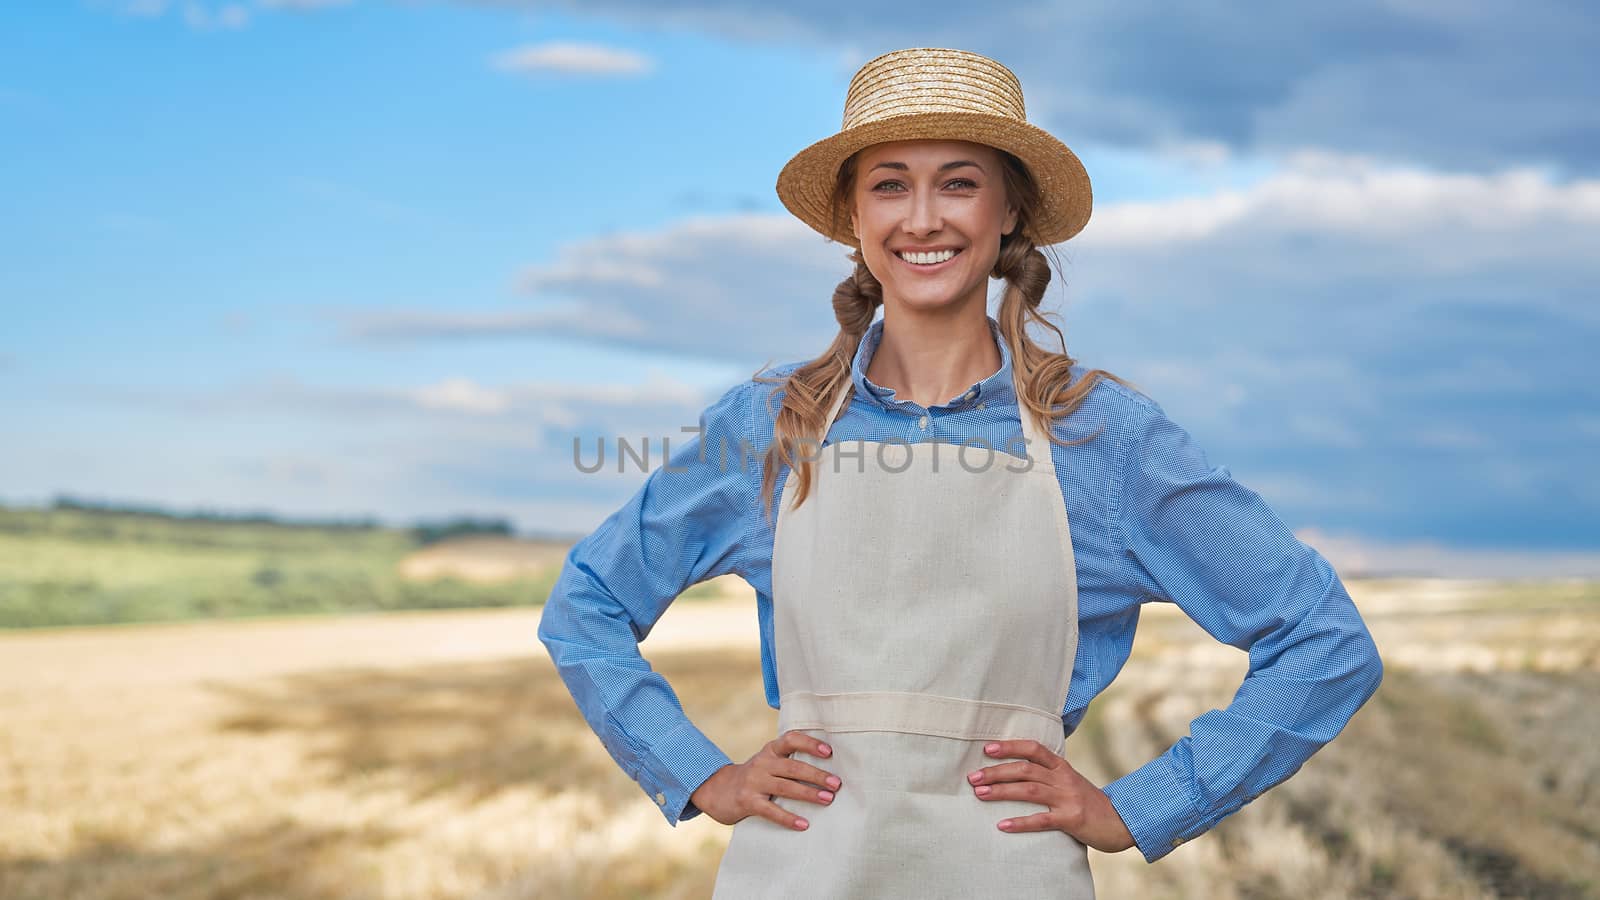 Woman farmer straw hat apron standing farmland smiling Female agronomist specialist farming agribusiness Happy positive caucasian worker agricultural field Girl hands on waist cloudy sky background